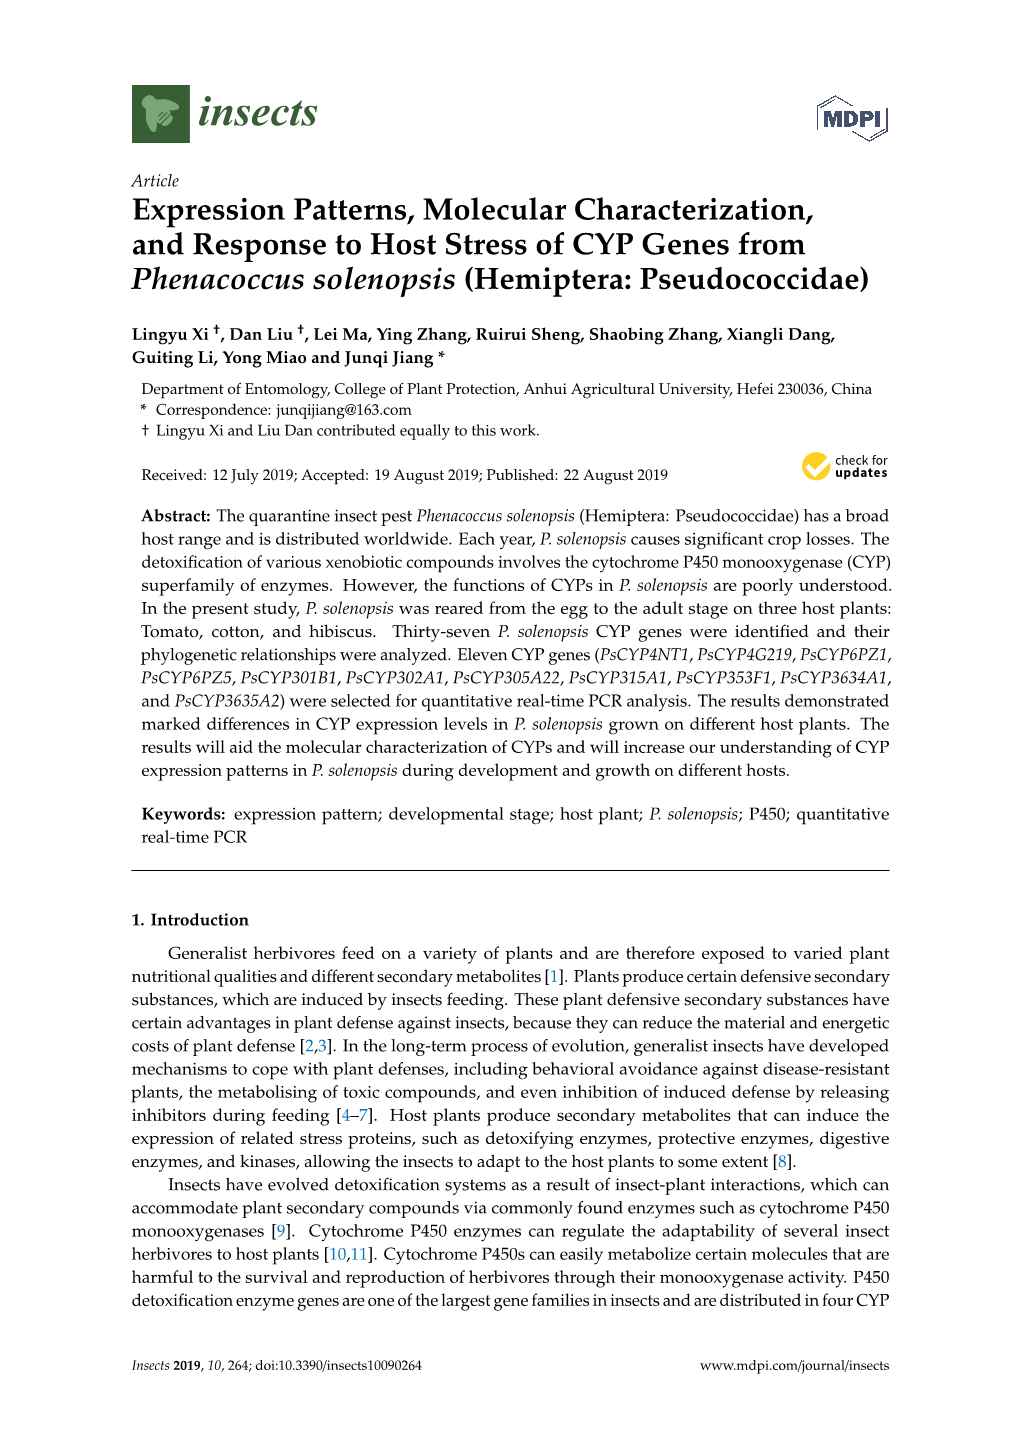 Expression Patterns, Molecular Characterization, and Response to Host Stress of CYP Genes from Phenacoccus Solenopsis (Hemiptera: Pseudococcidae)